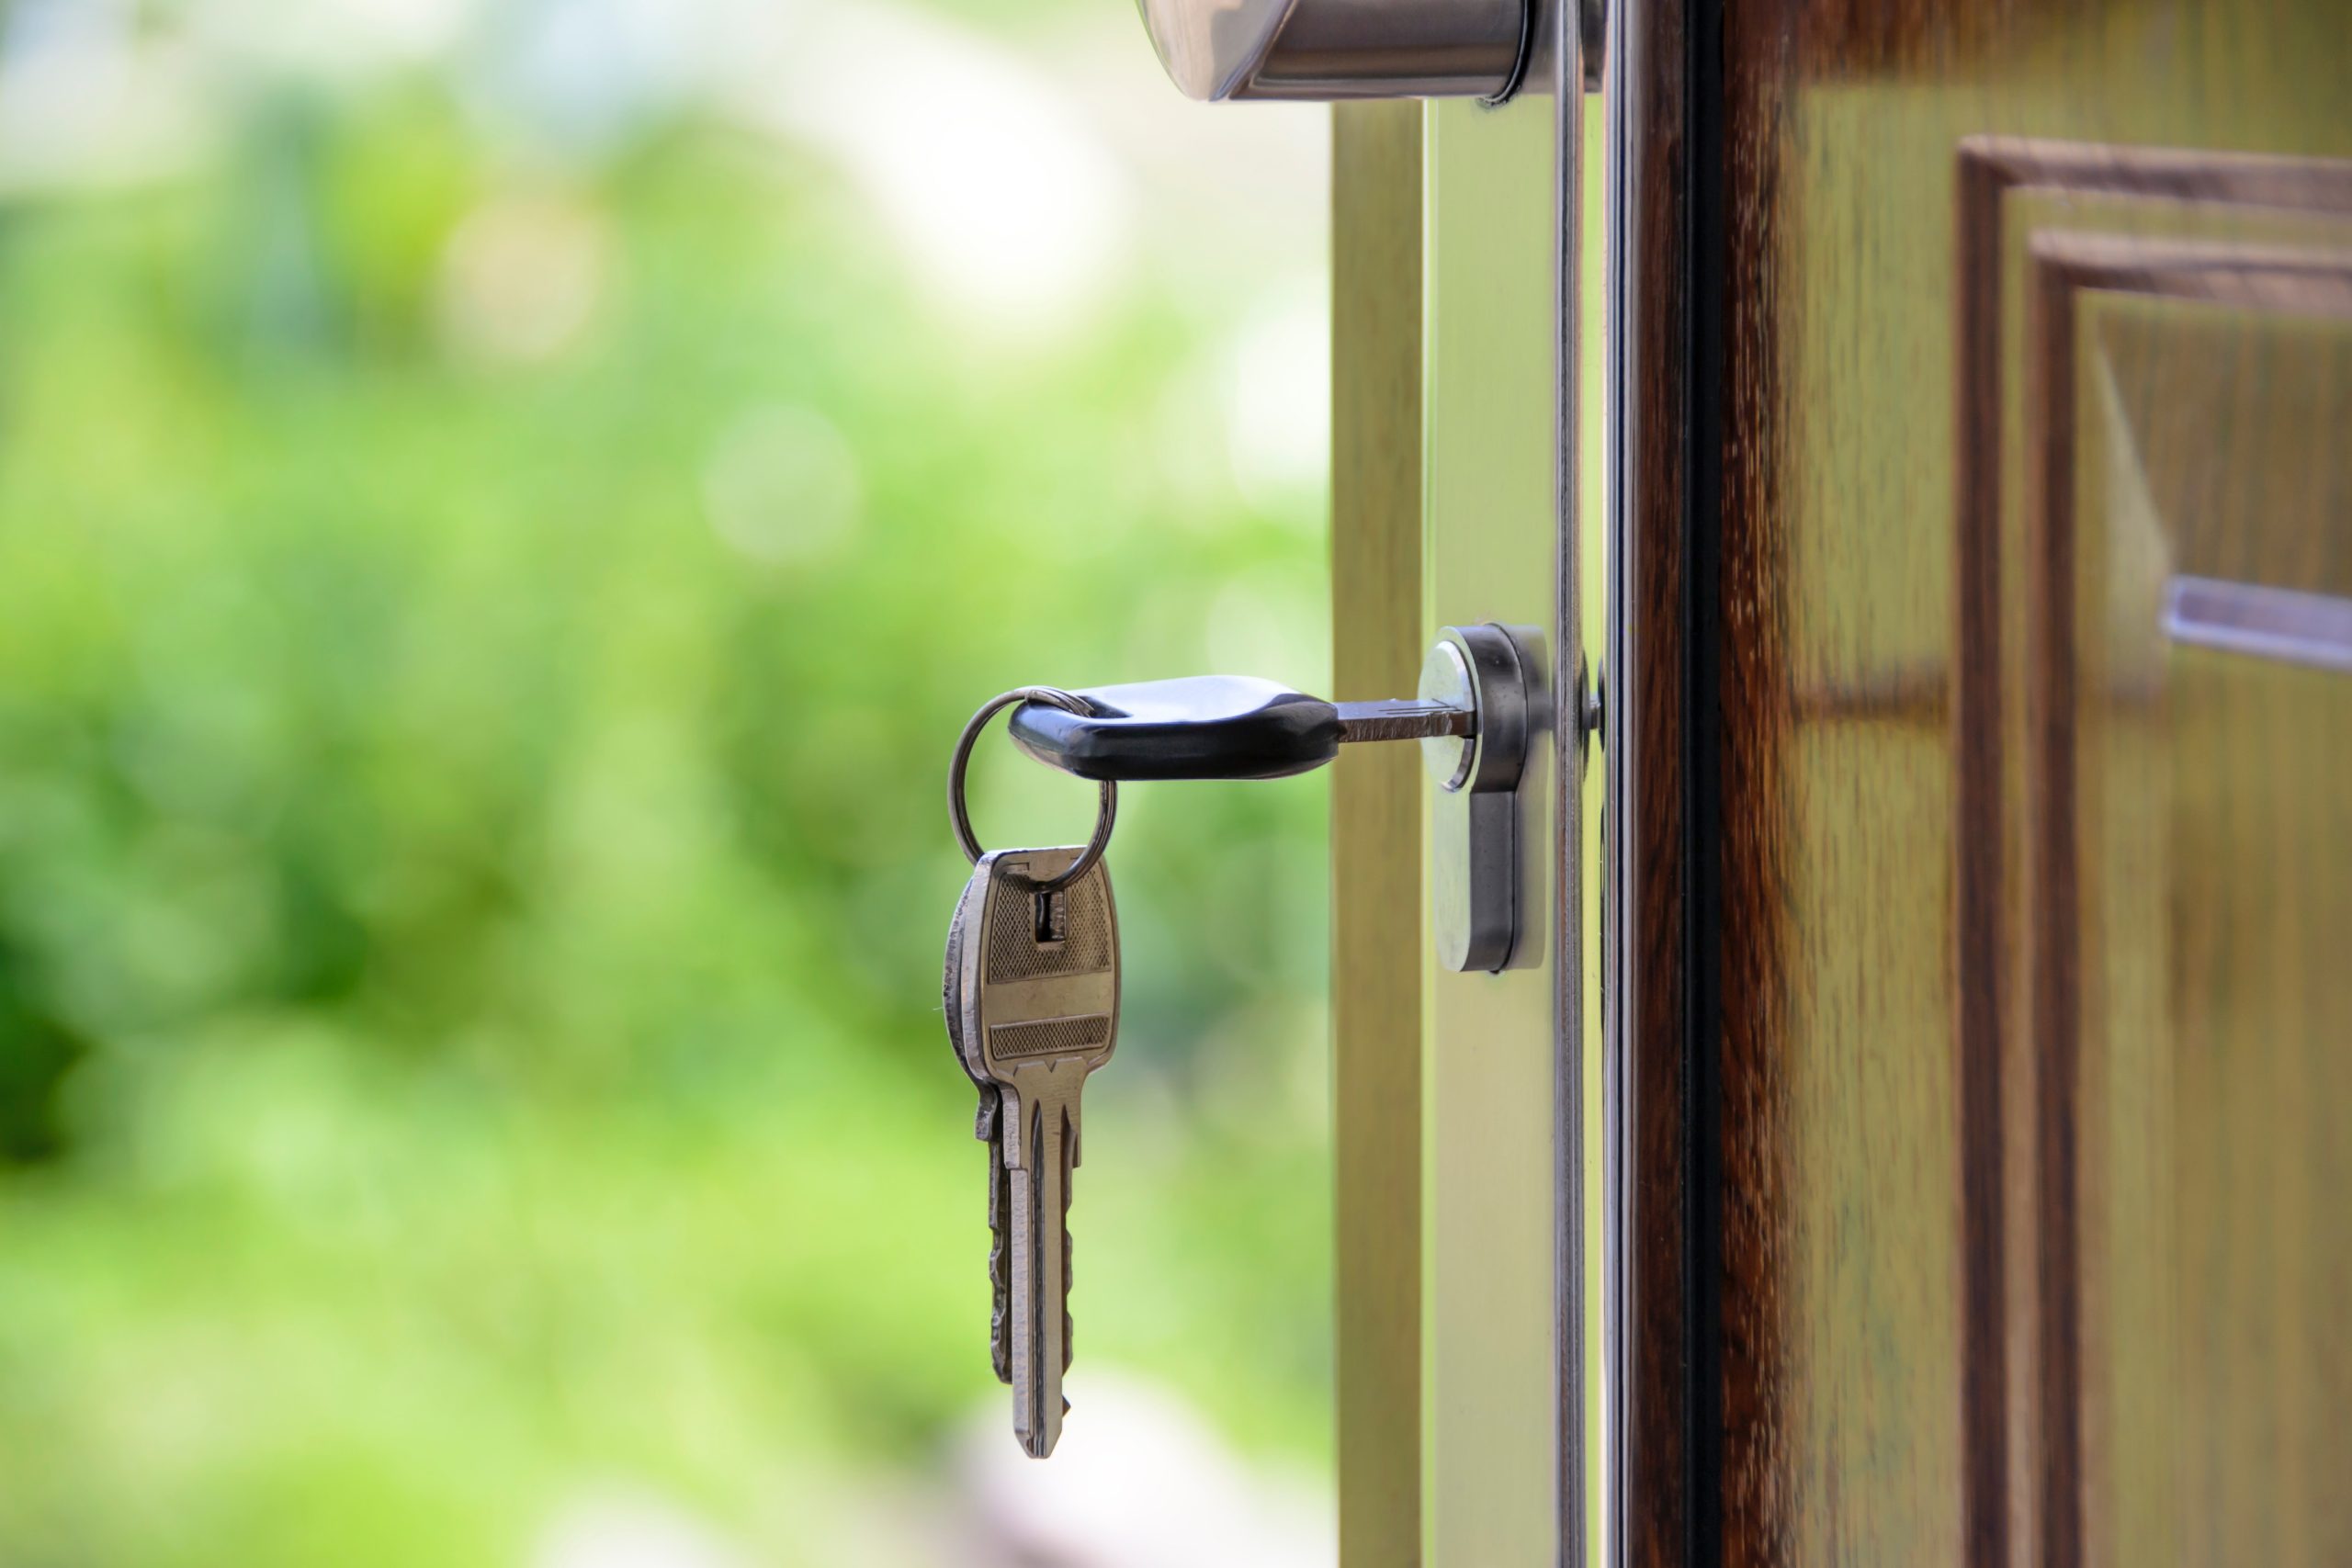 What to keep in mind when buying an anti-burglary door?